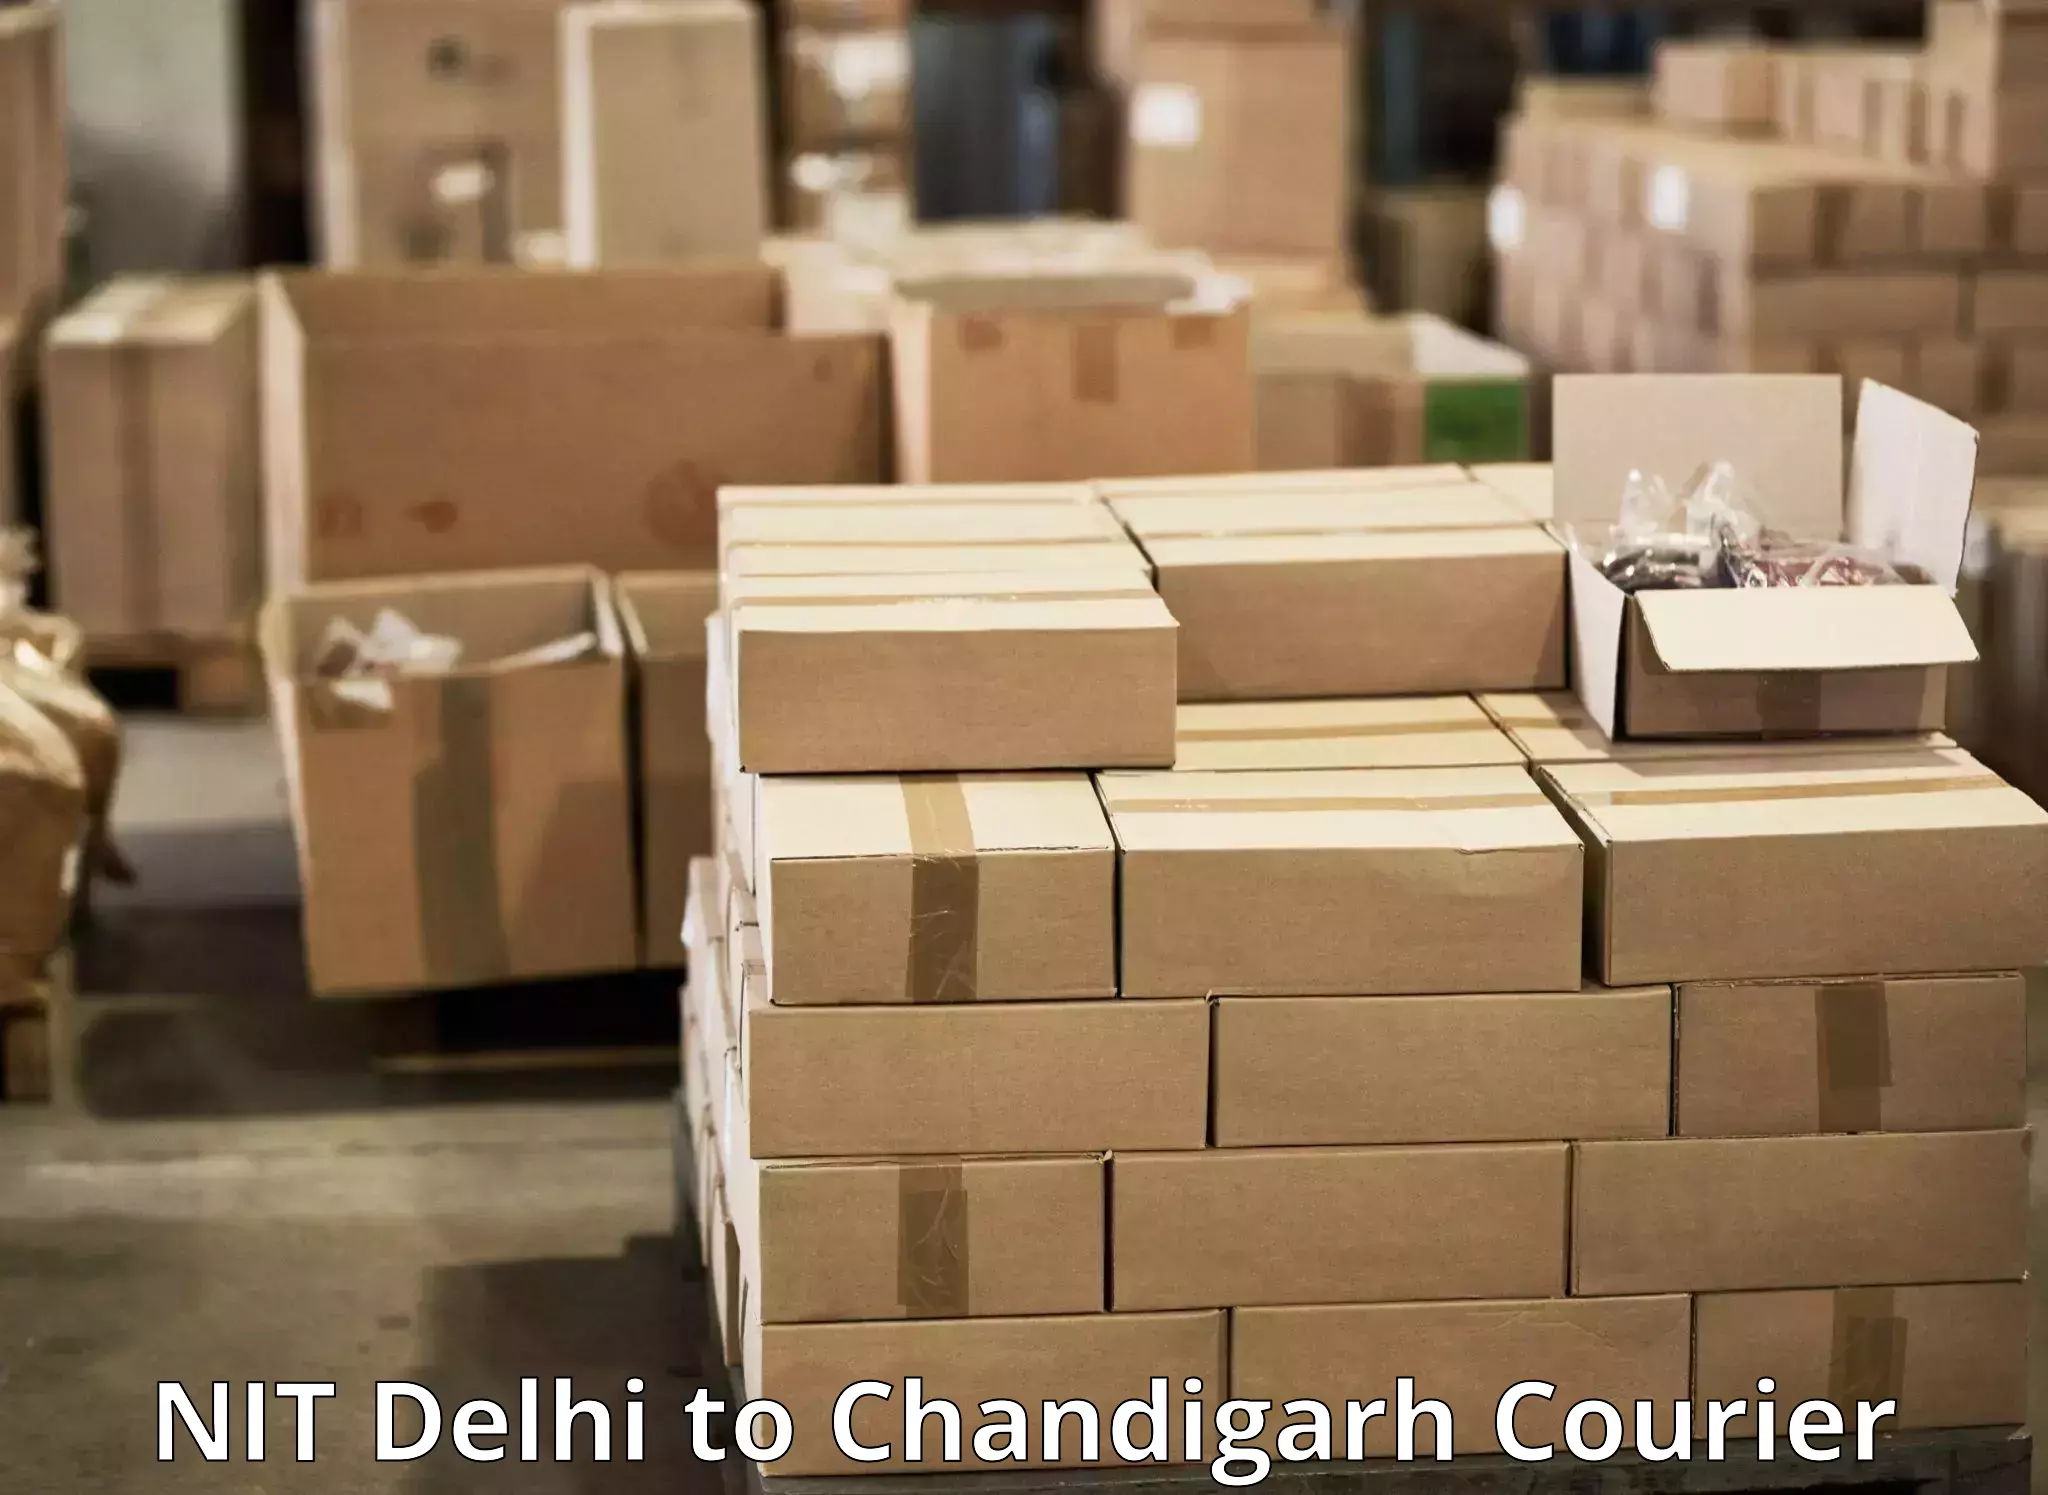 Same-day delivery solutions NIT Delhi to Chandigarh